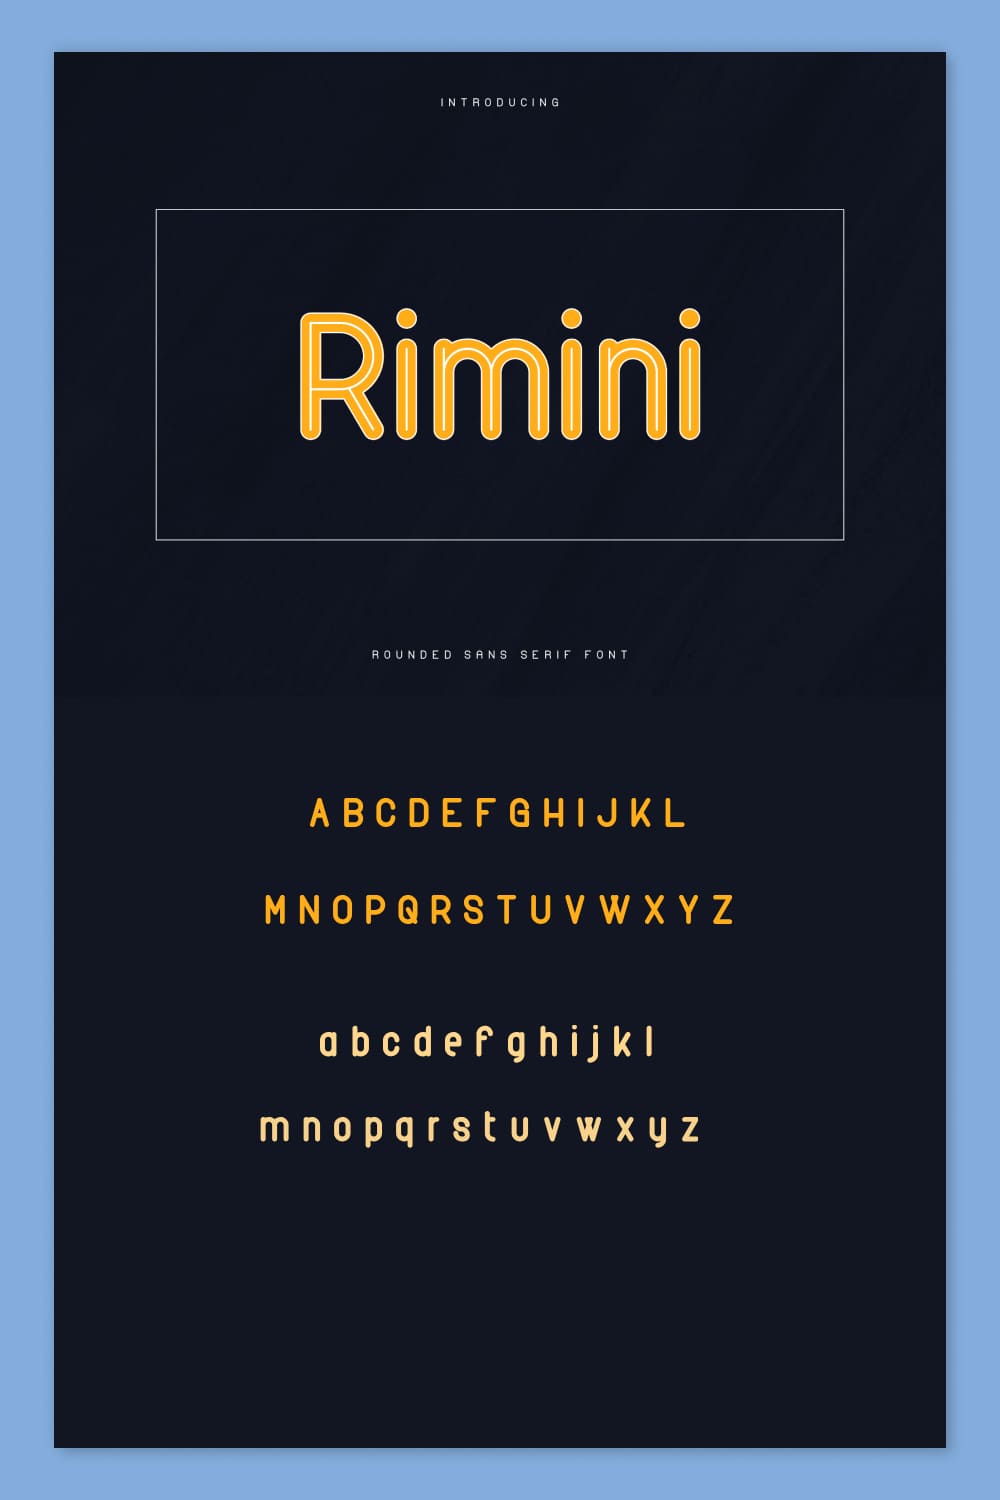 An example of a Rimini-Rounded Sans Serif Font on a black background.